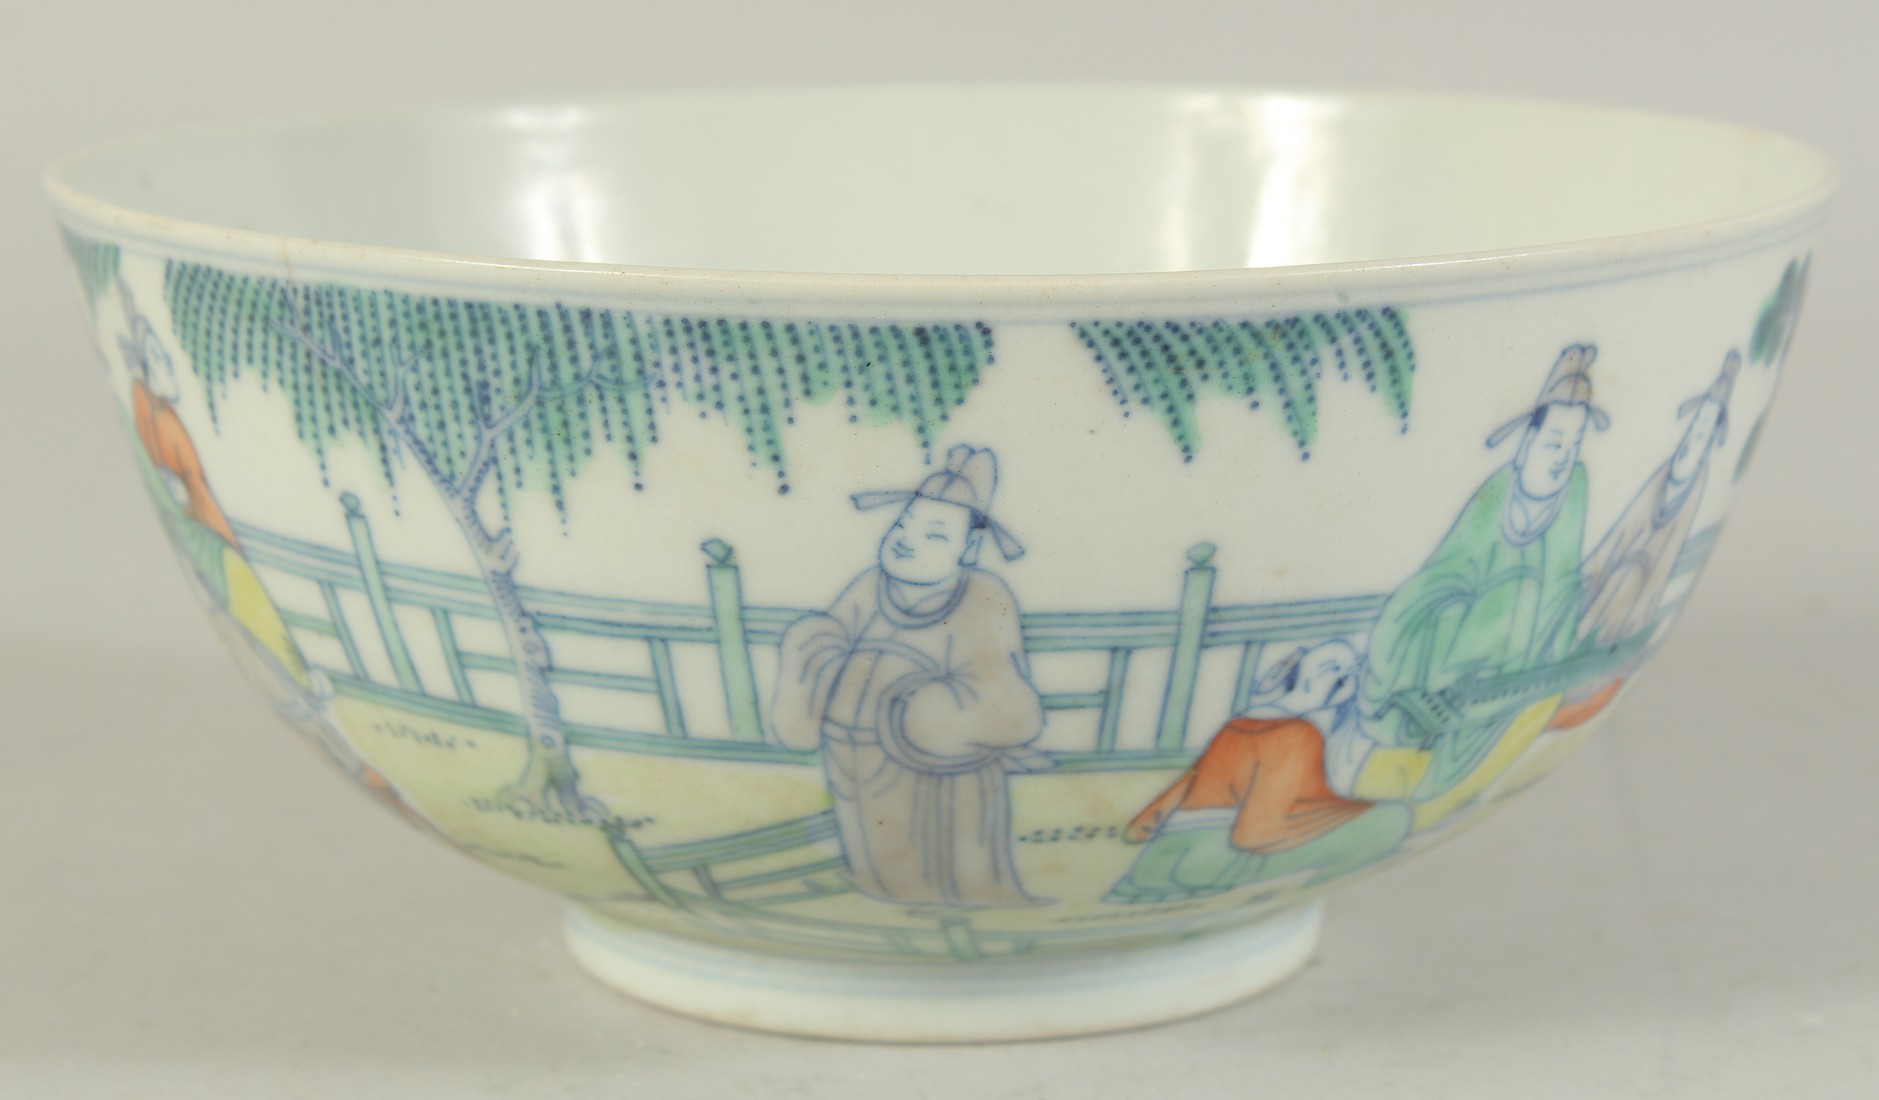 AN 19TH CENTURY CHINESE PORCELAIN BOWL, painted with various figures in an outdoor setting, the base